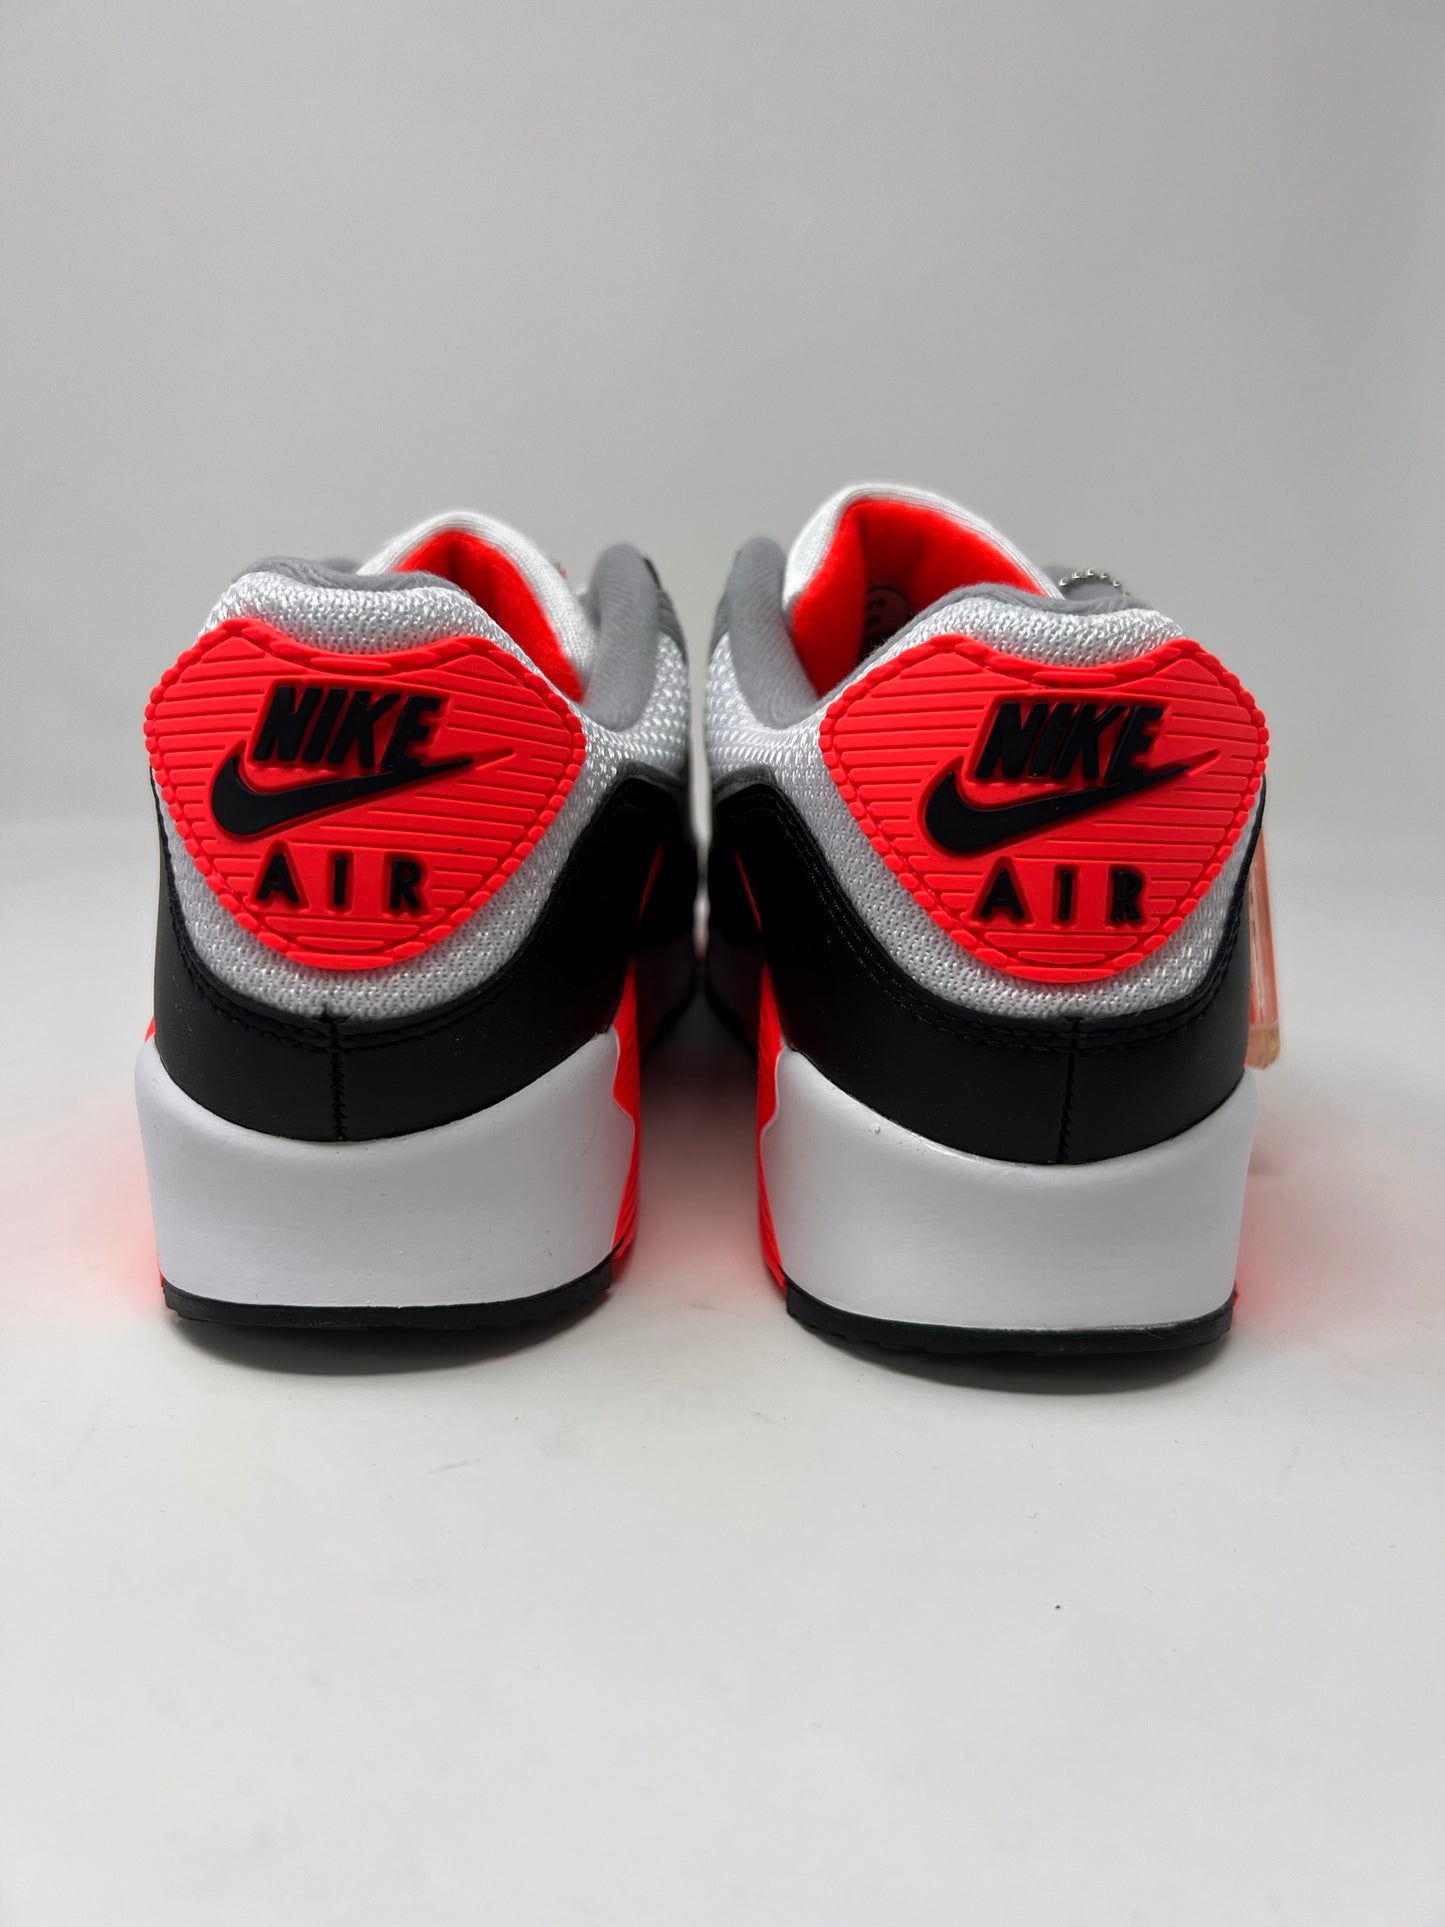 Nike Air Max 90 Infrared 2020 UK7 DS